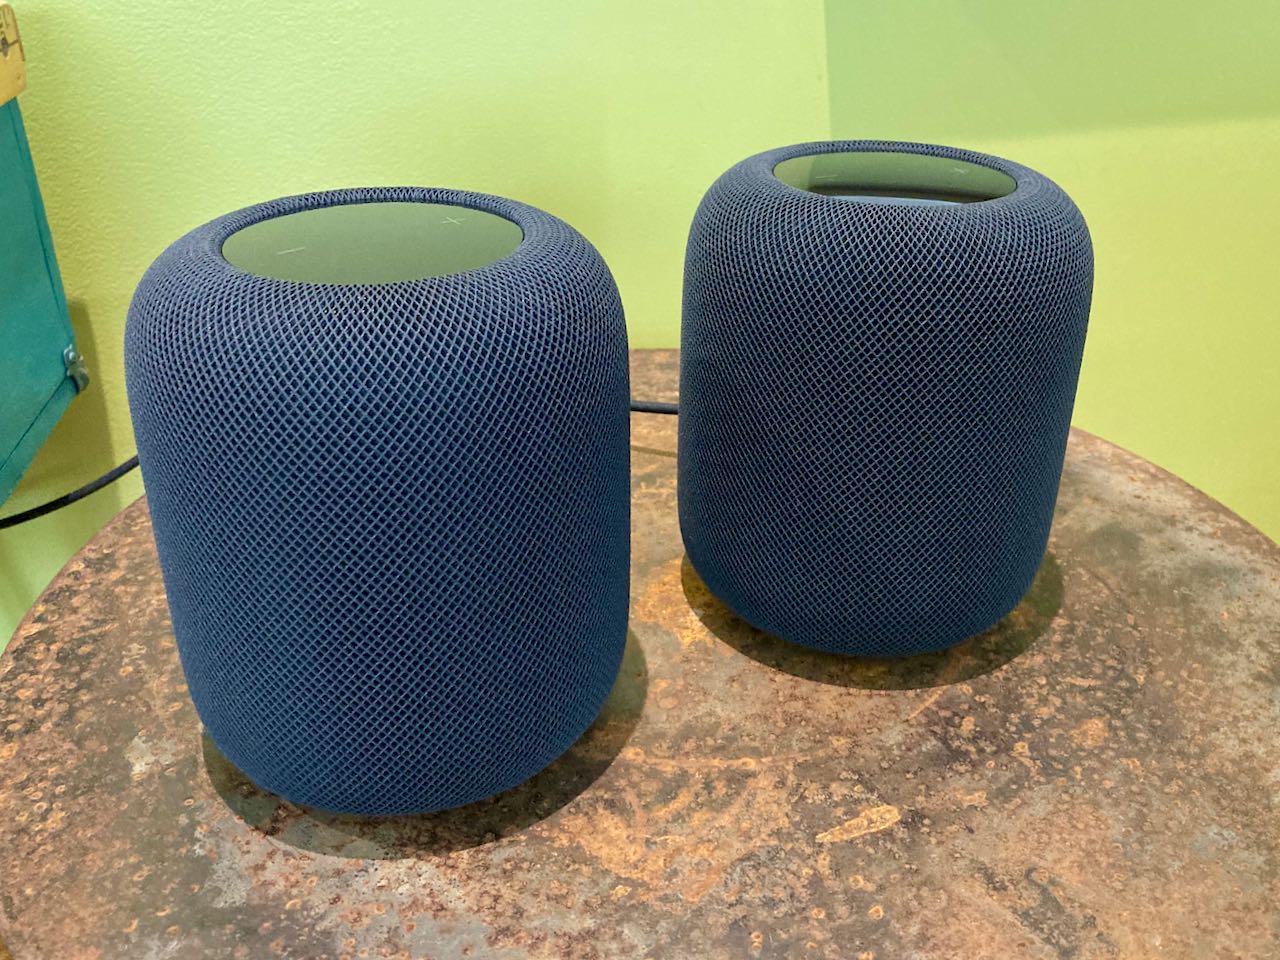 Apple HomePod Adds Stereo Pairing And AirPlay 2: First Review